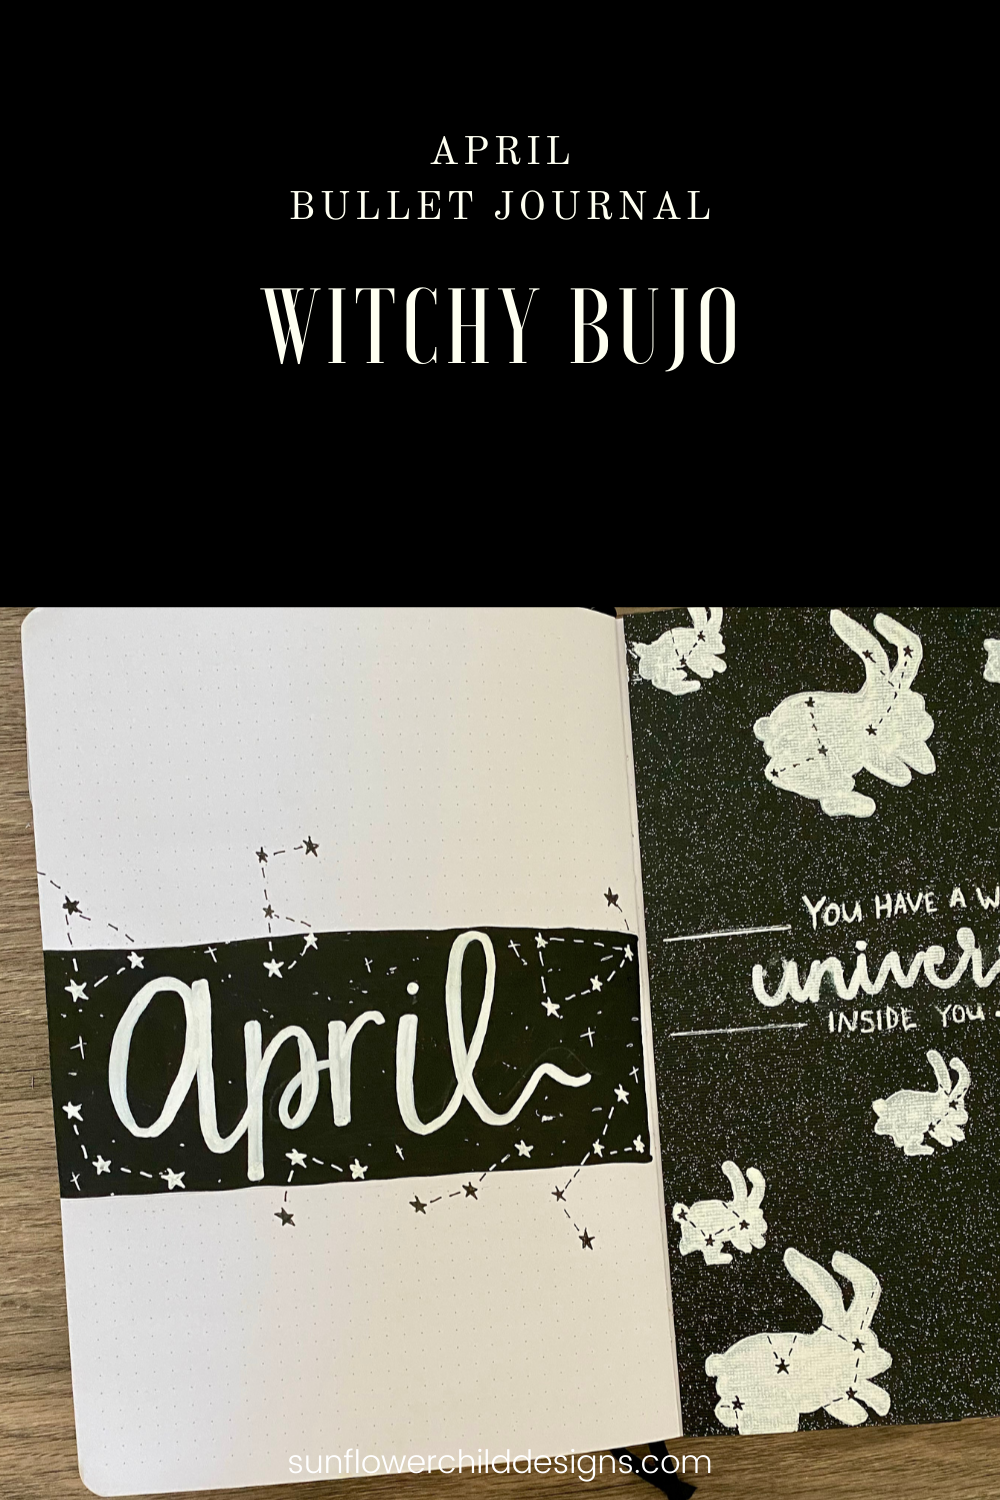 april-bullet-journal-ideas-witchy-bullet-journal 8.png